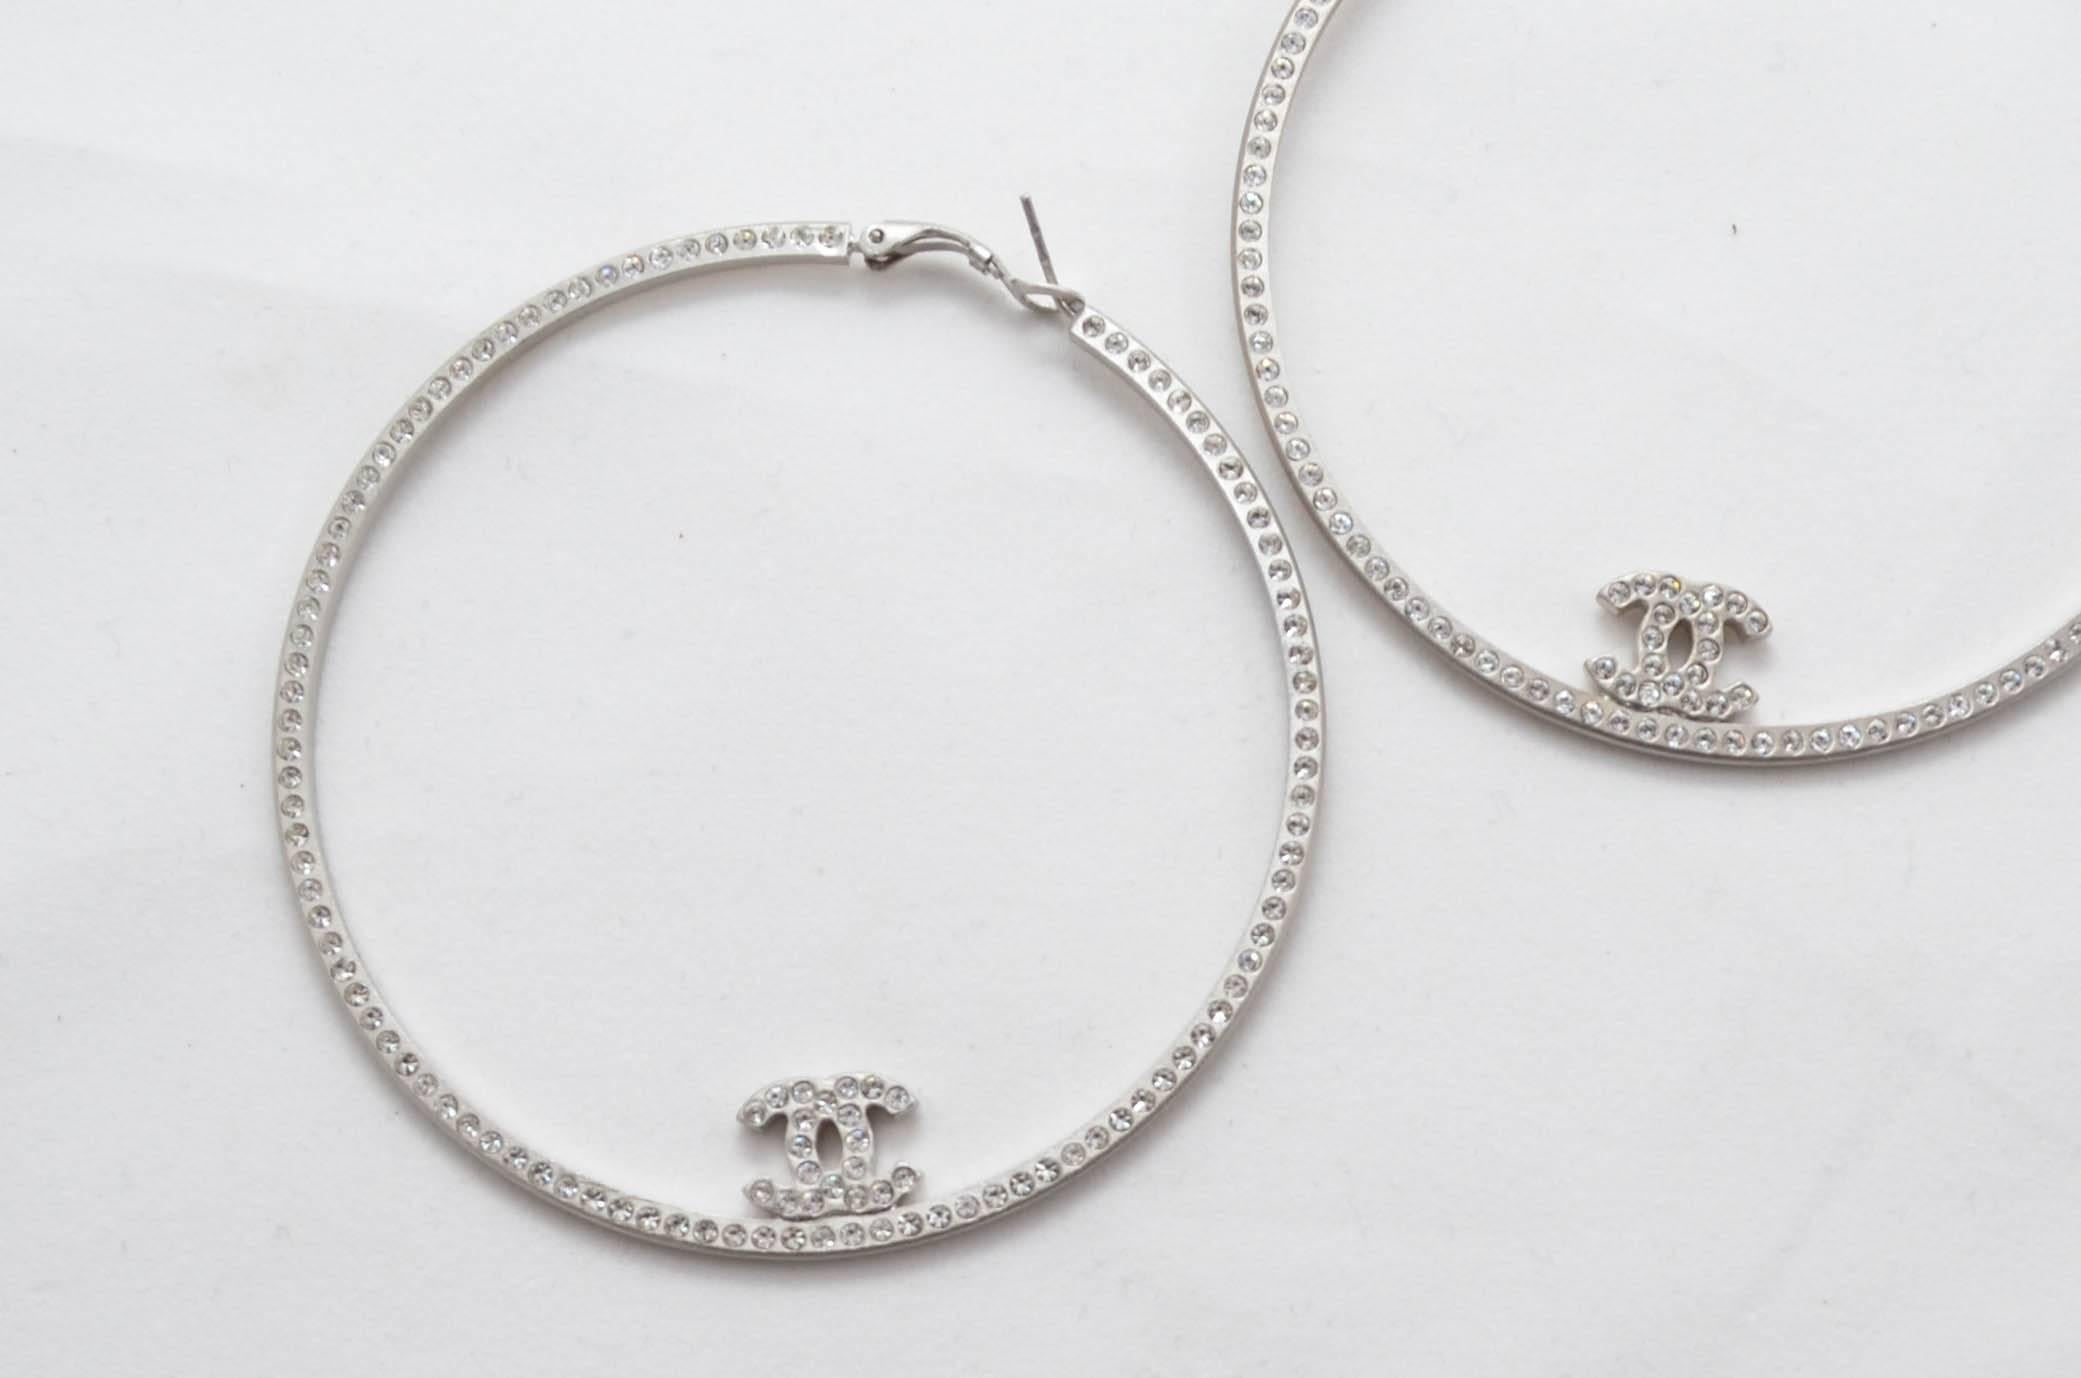 Beautiful extra-large light silver tone metal Chanel crystal Boucles Oreille hoop earrings. From the 2008 spring Collection. Made in Italy. For pierced ears. Features signature CC markings on each hoop. 

Measurements in inches:
Circumference 3
CC's